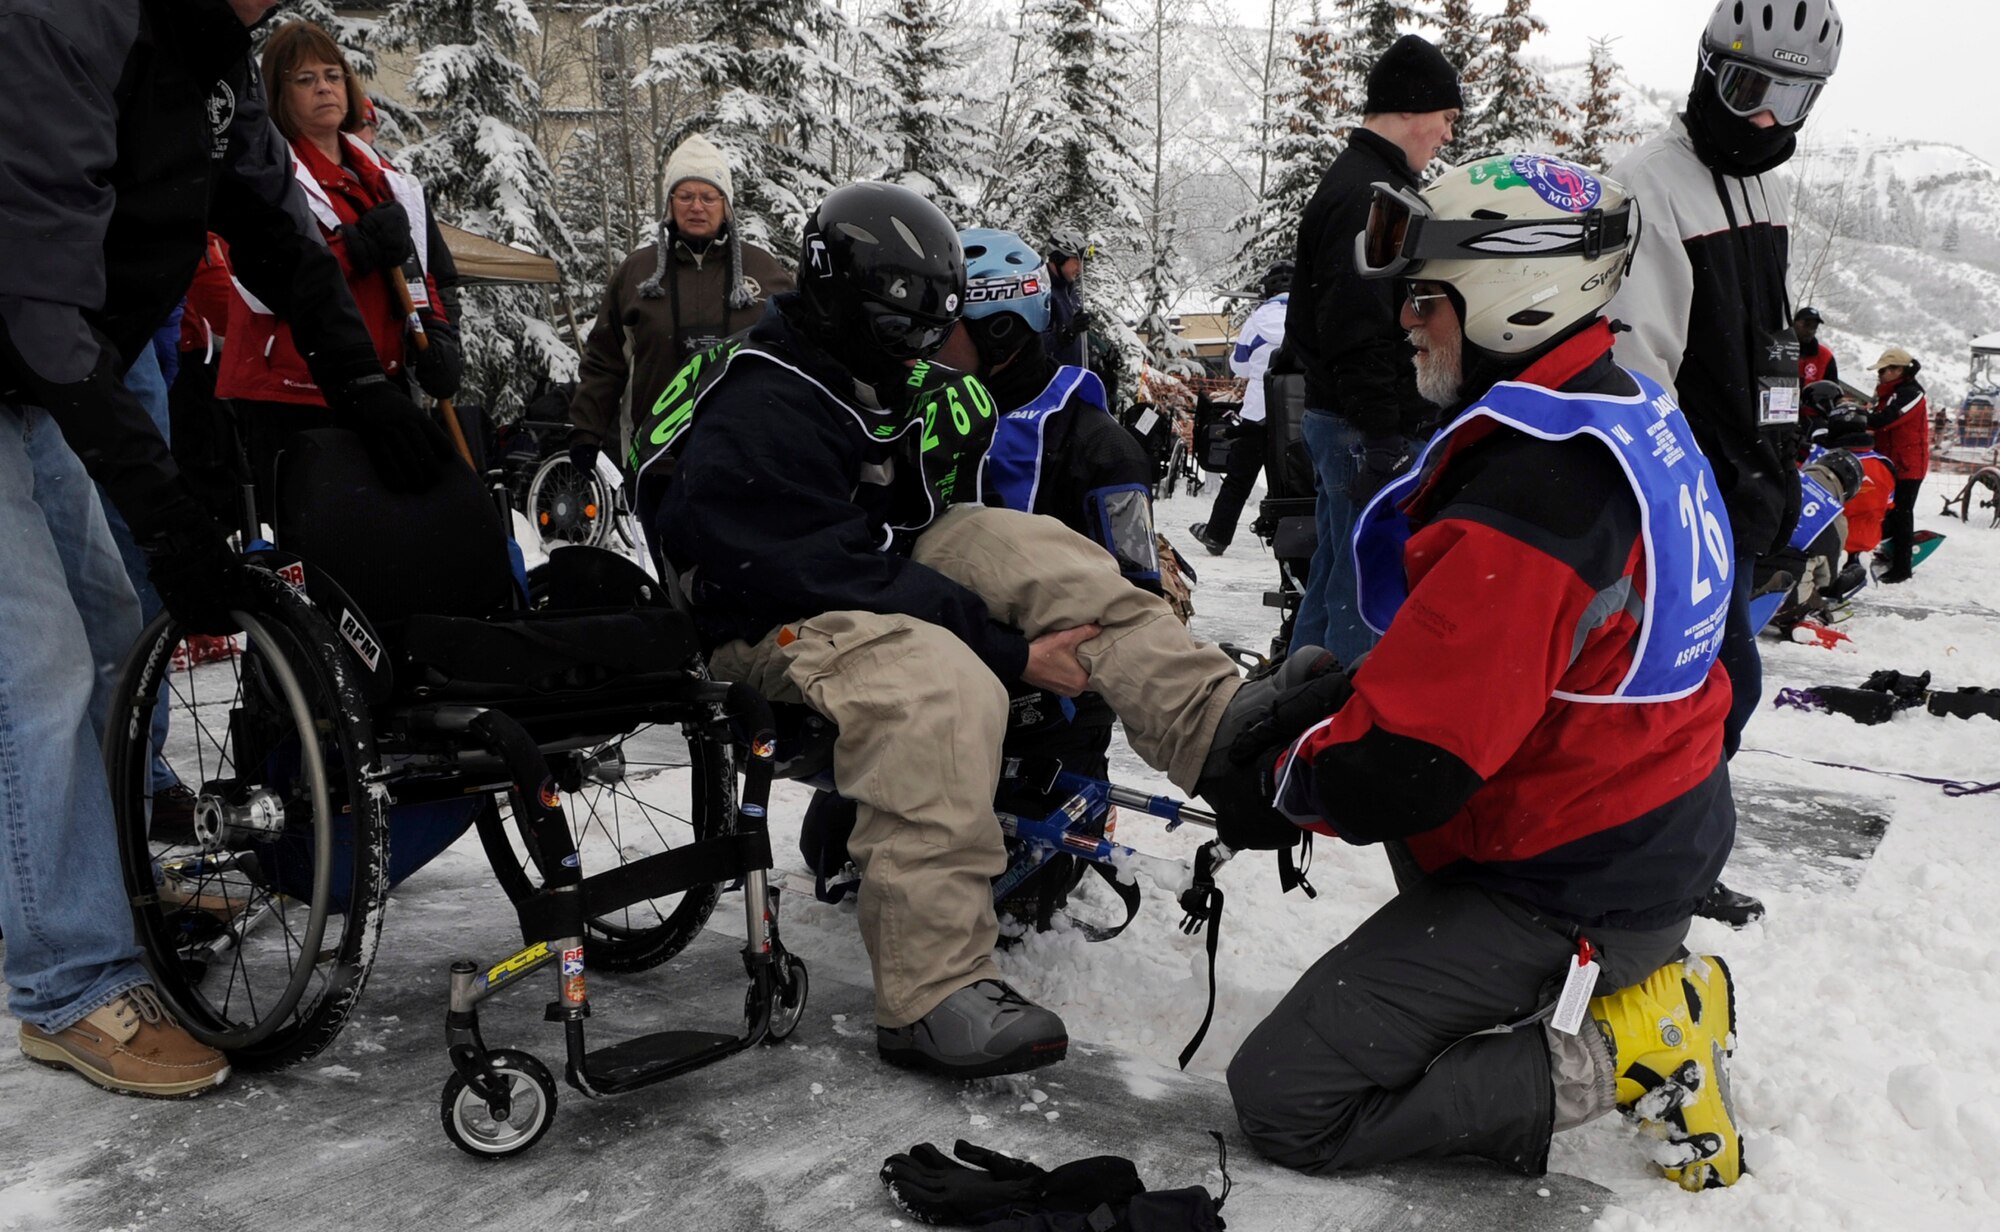 Senior Airman Shawn O'Neil exchanges his wheelchair for his turn to mono-ski with the help of an instructor during the 23rd National Disabled Veterans Winter Sports Clinic held March 30 at the Snowmass Village, Colo. (U.S. Air Force photo/Staff Sgt. Desiree N. Palacios)